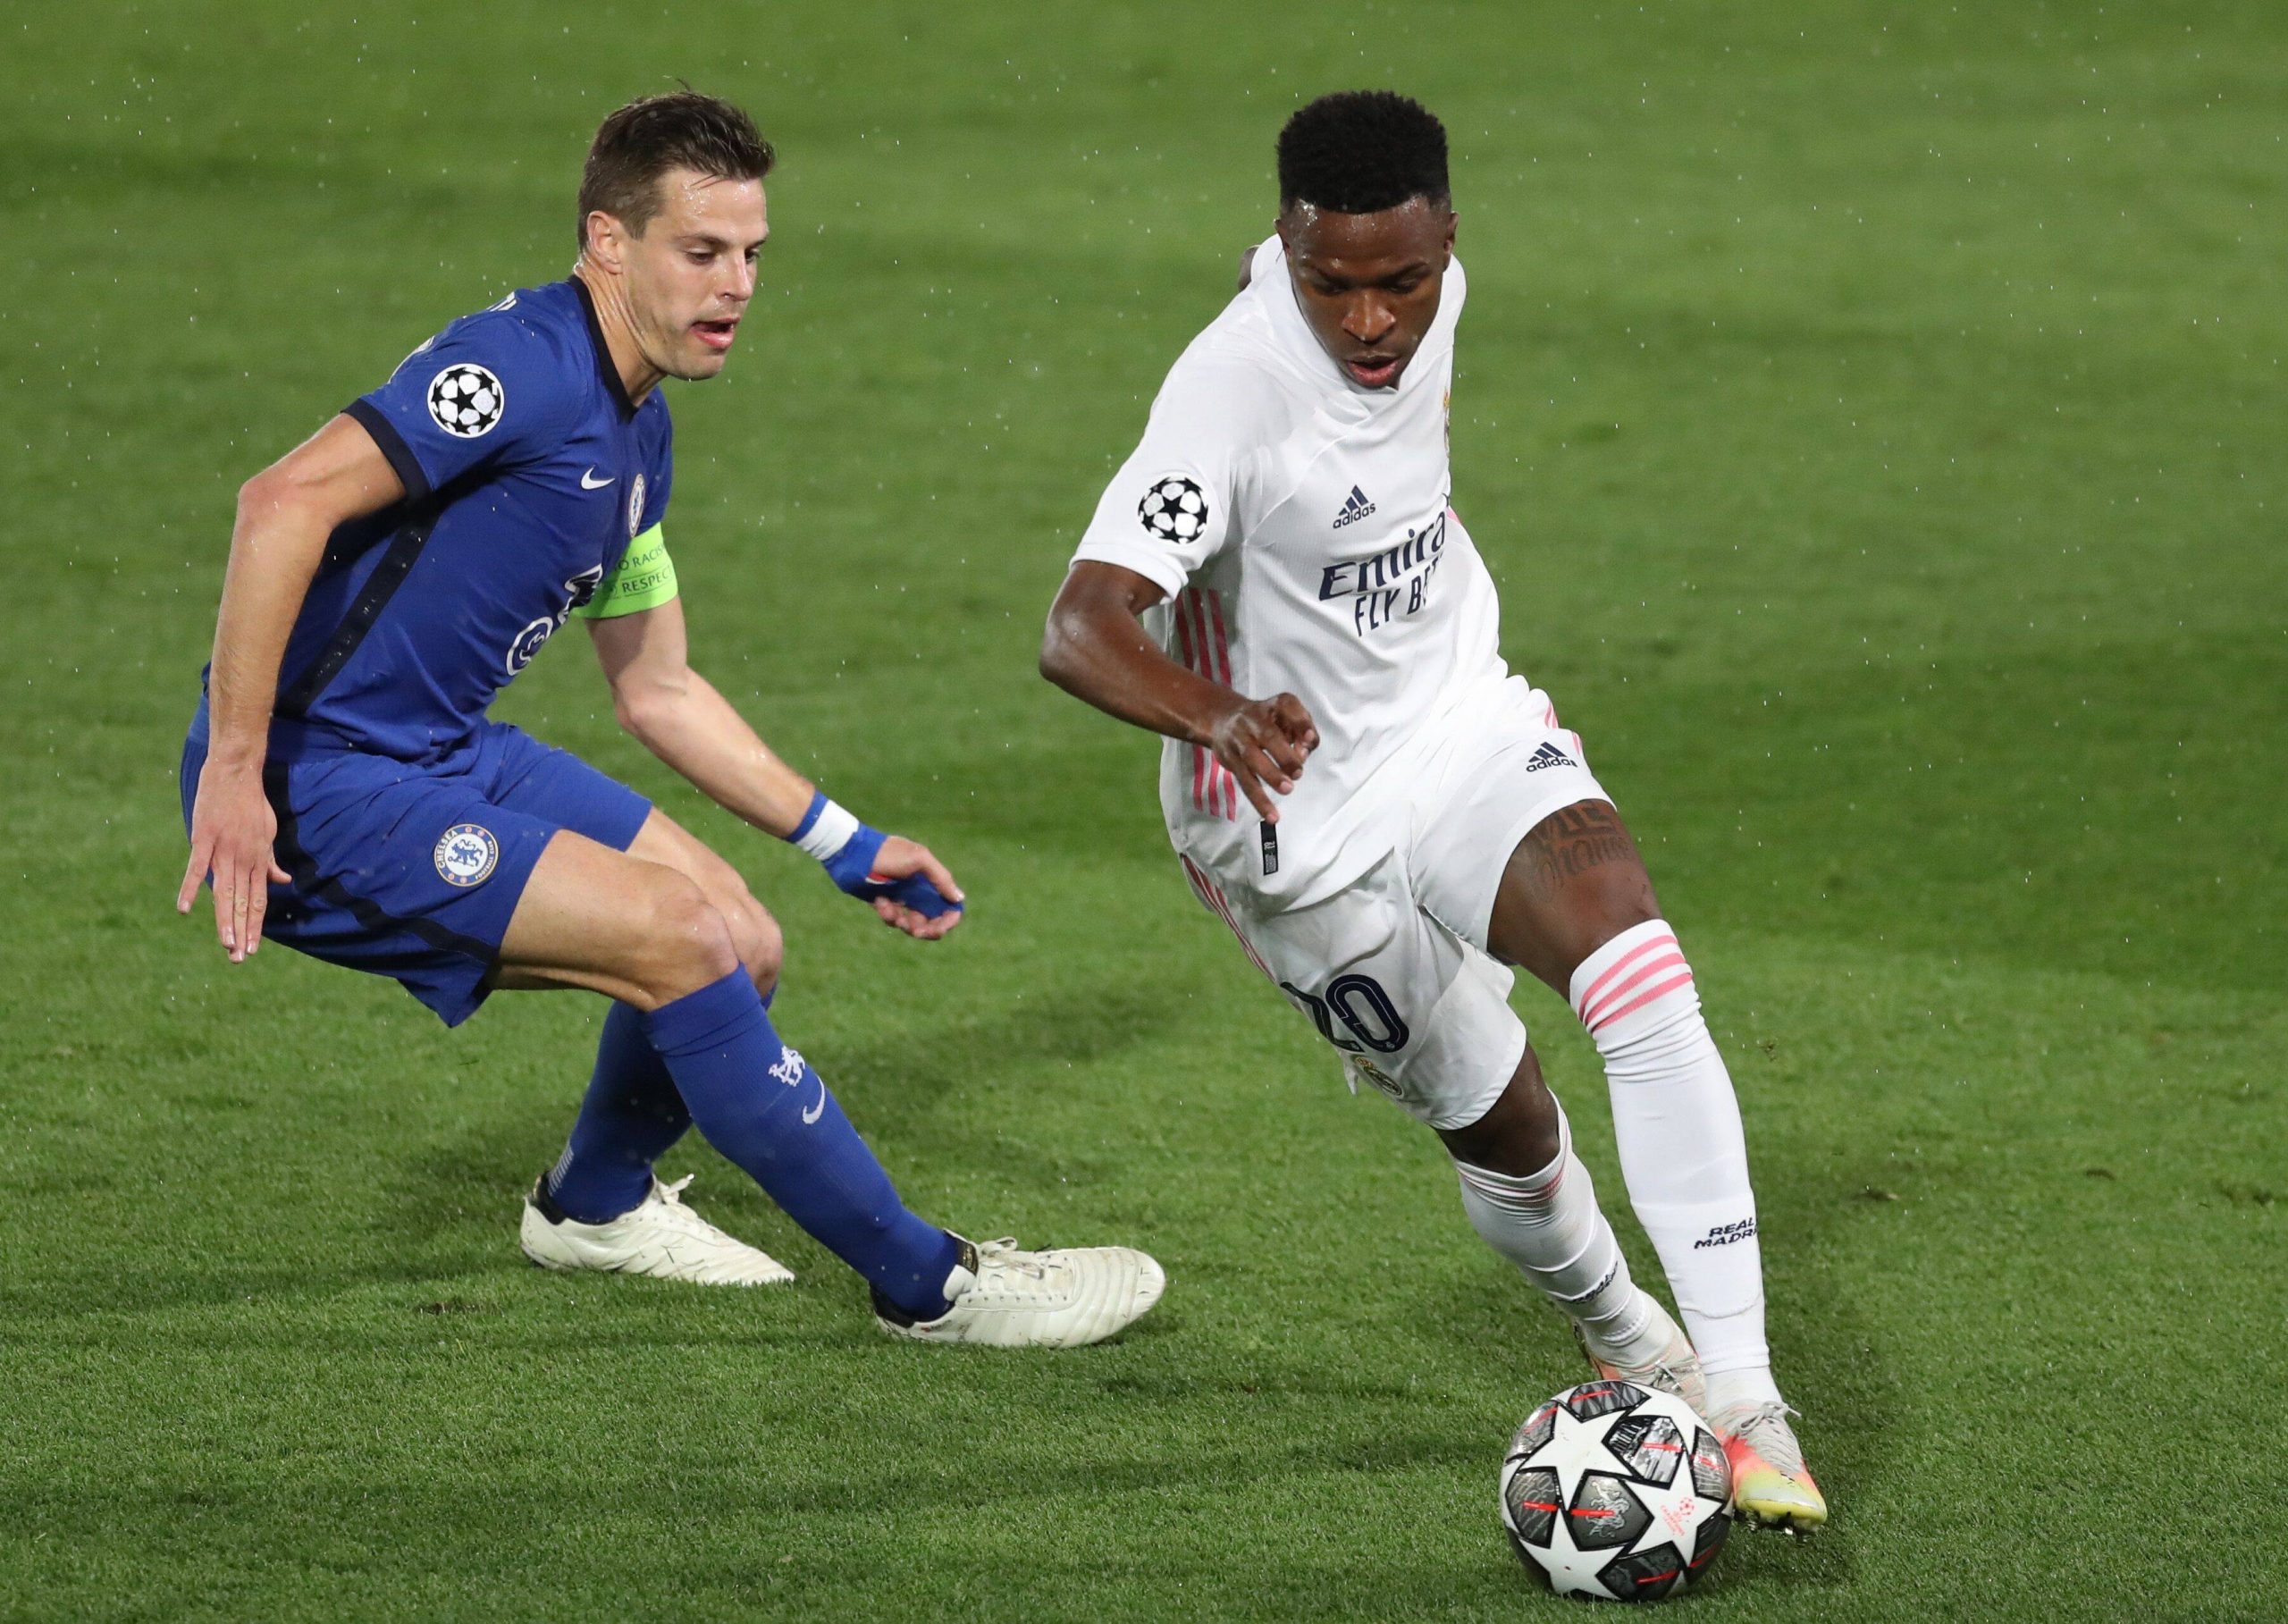 Vinicius Junior names Chelsea star Reece James as one of his toughest opponents.